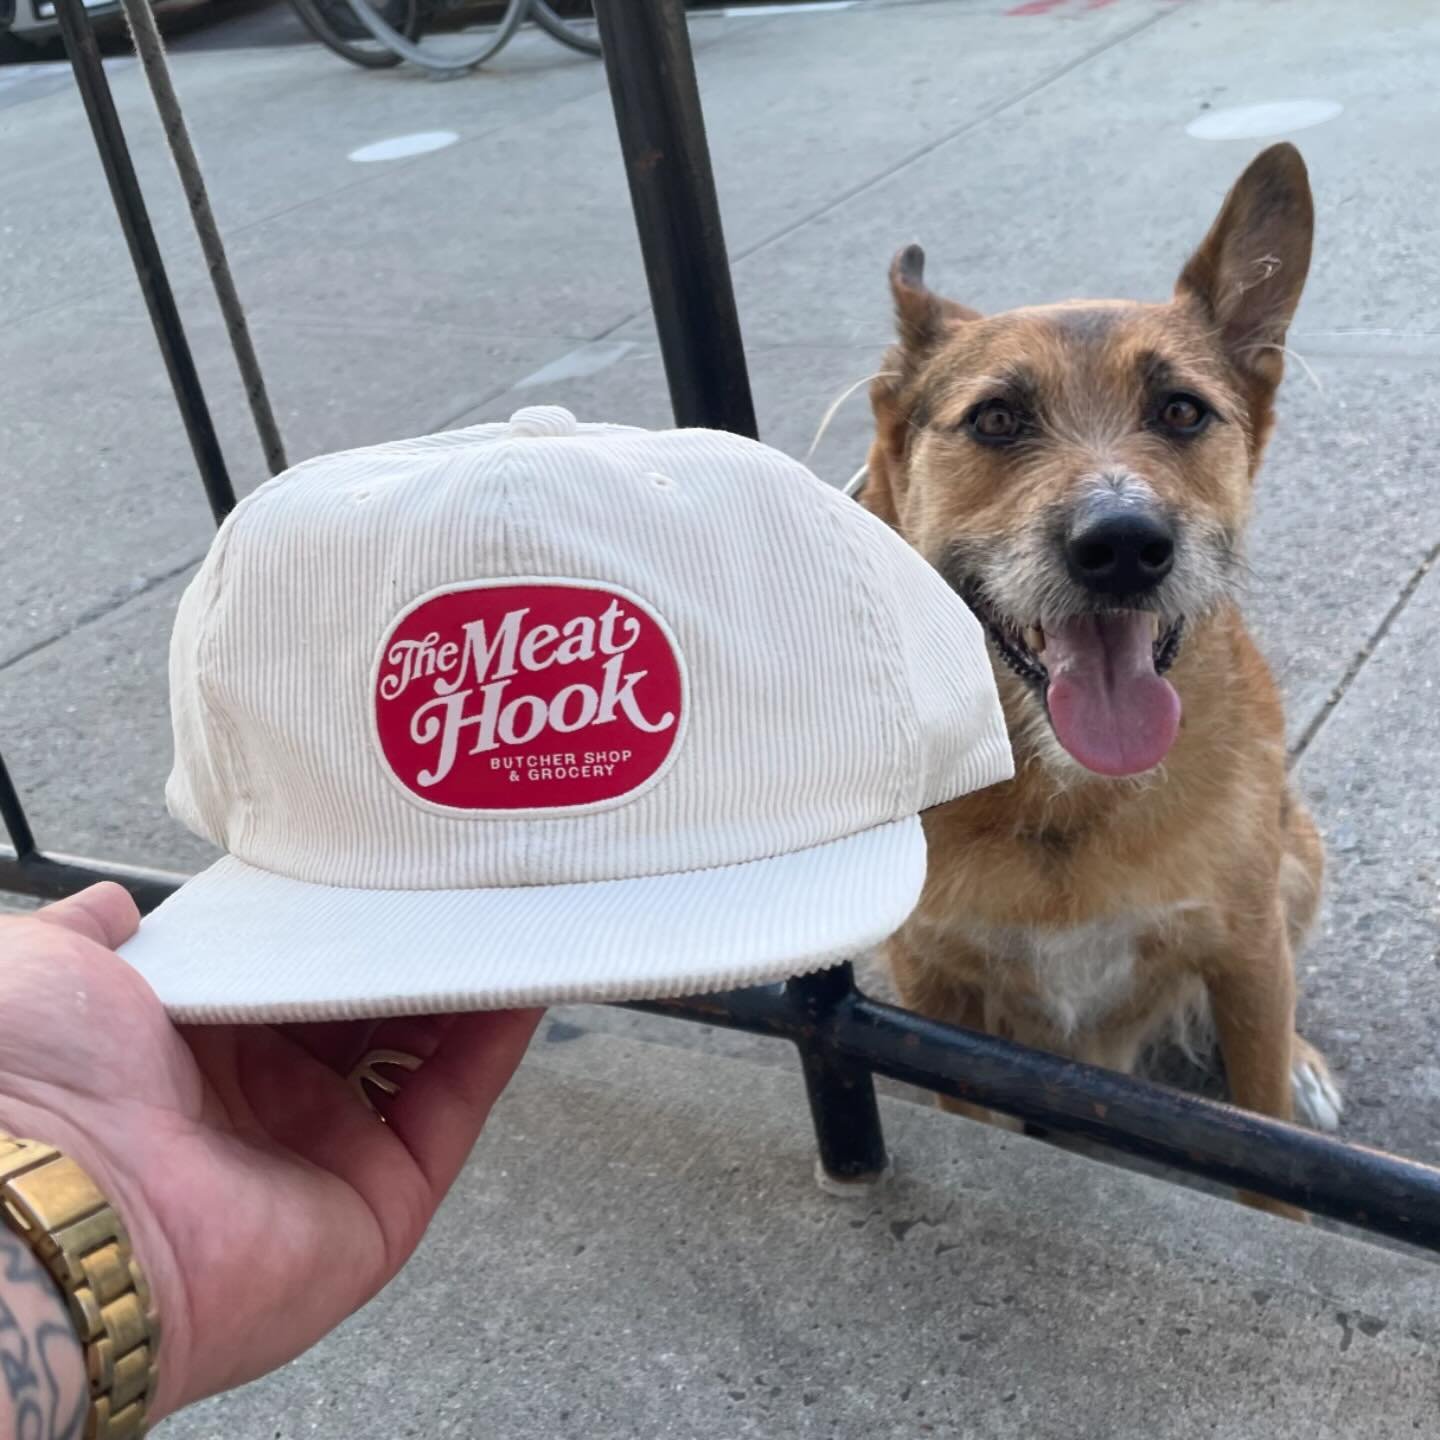 New hats are available on the website nationwide and locally in all three shops.**

**adorable color coordinated dog not included